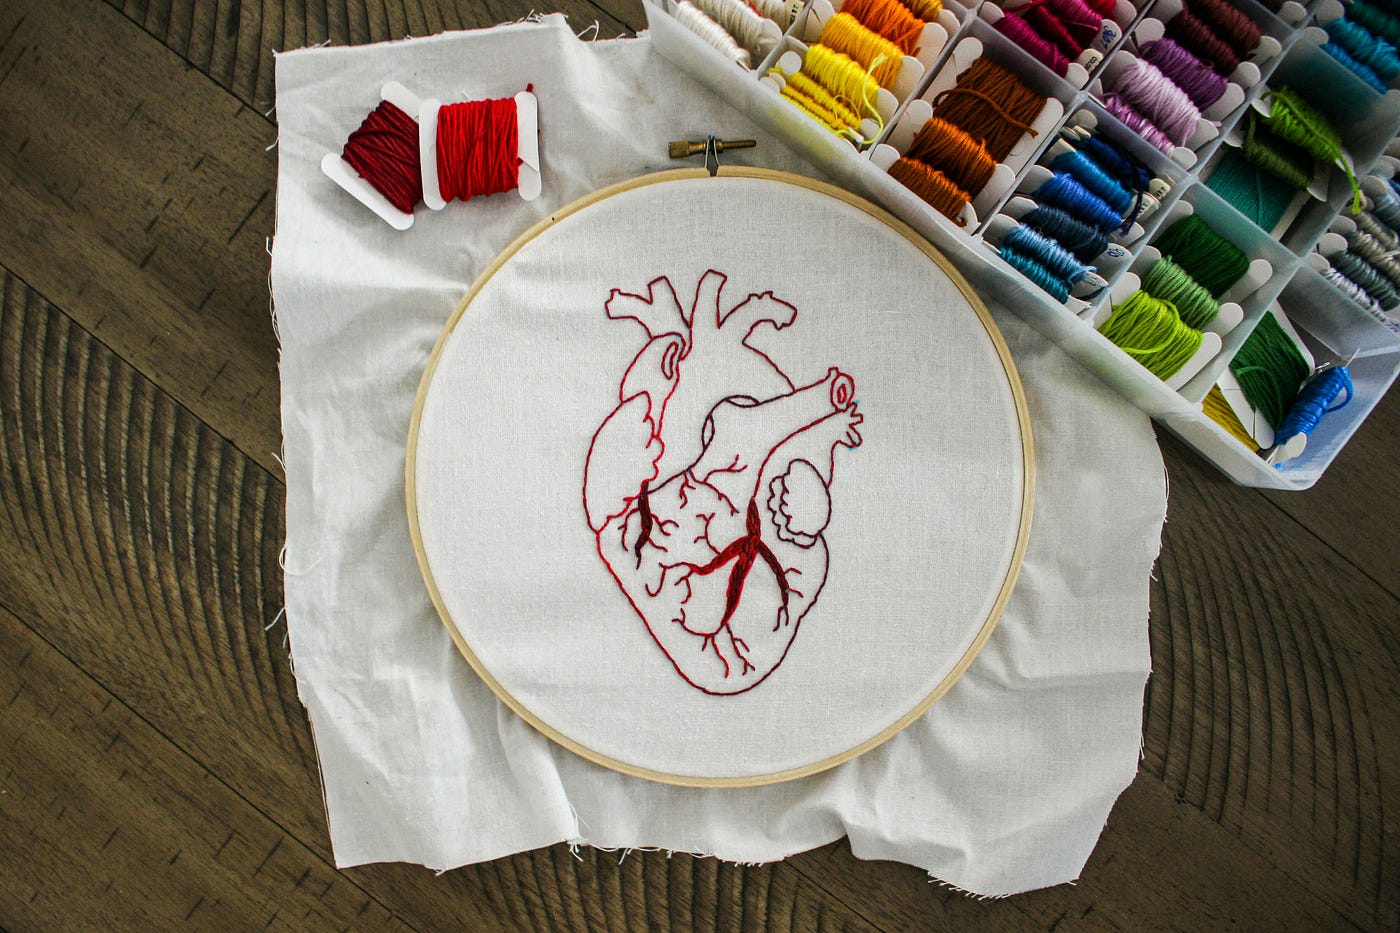 Cross stitch vs embroidery: a beginner's guide - Gathered